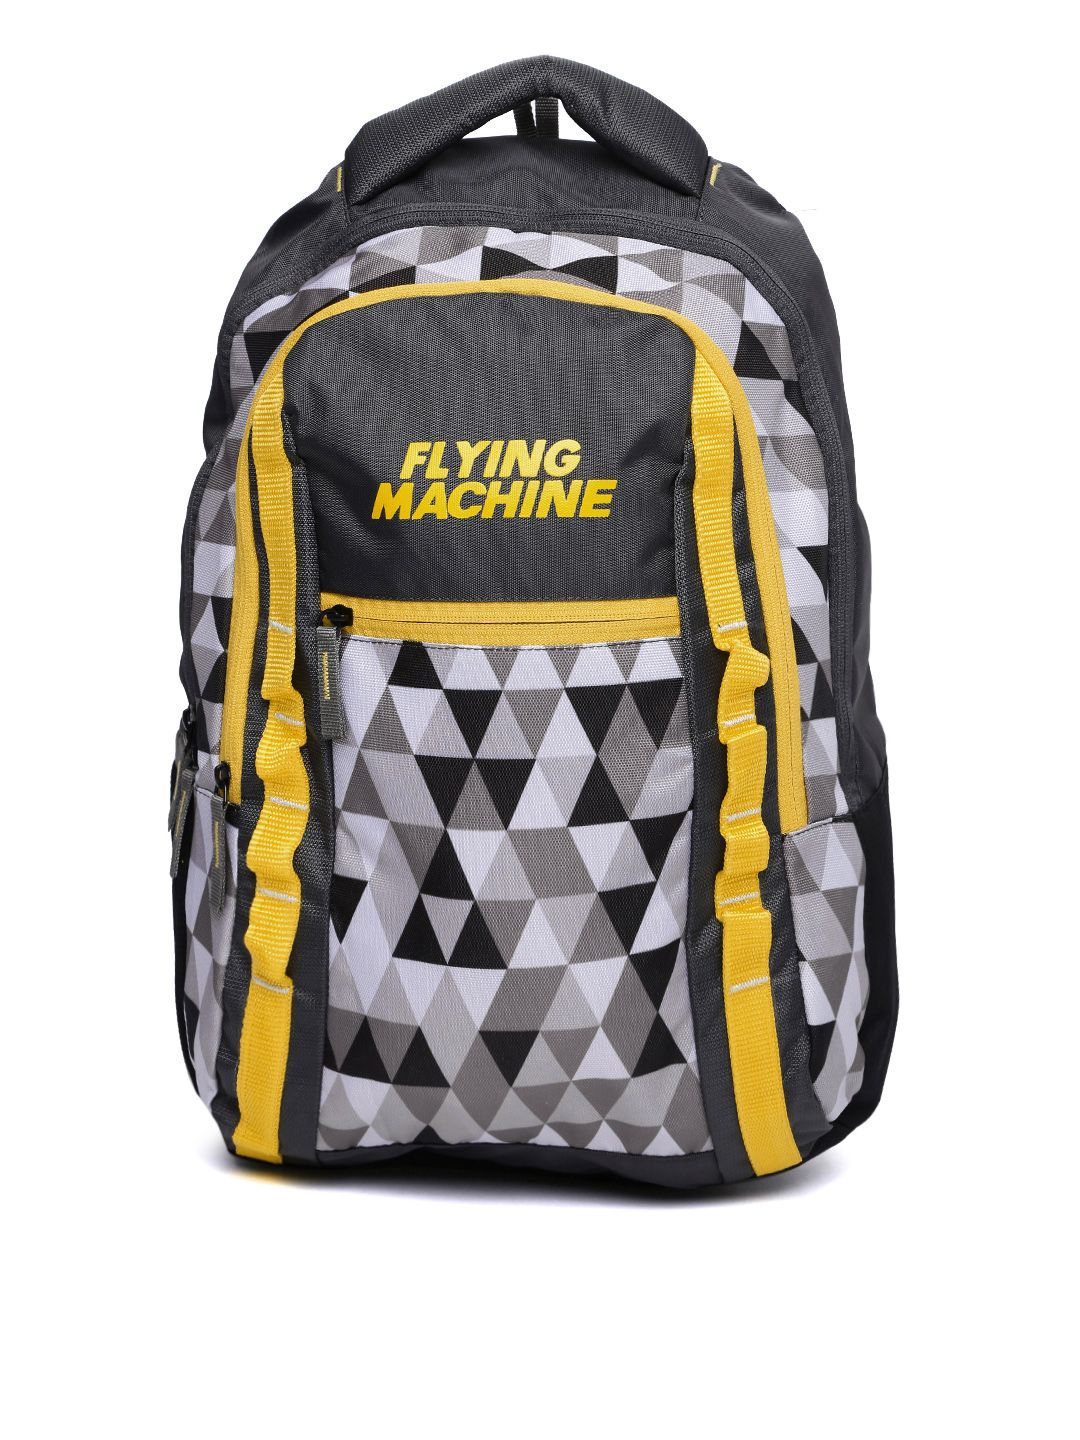 Flying Machine Unisex Charcoal Grey & Yellow Printed Backpack Price in India